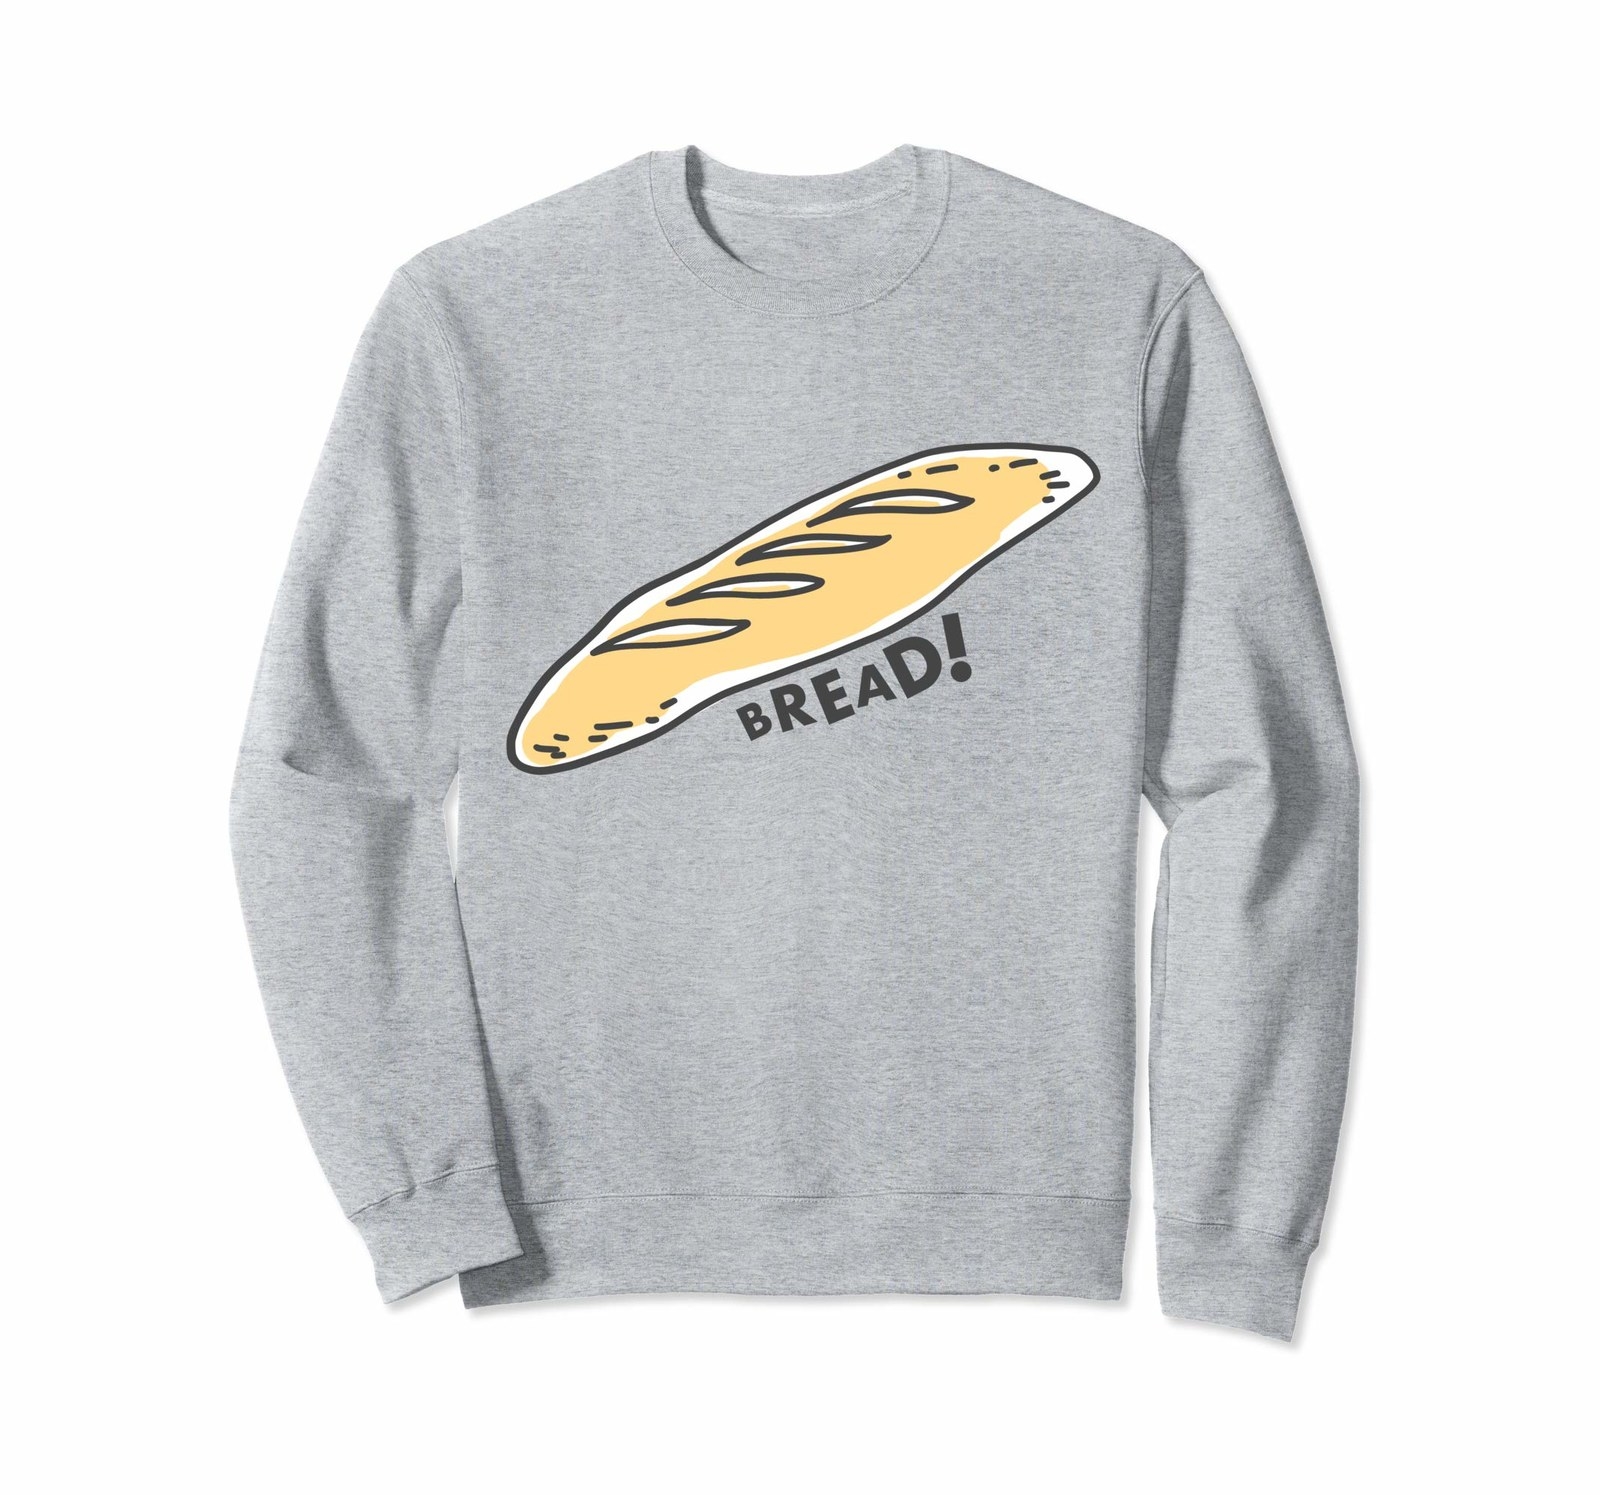 If You Have A Craving For More Eating Your Feed, You 100% Need This Merch!